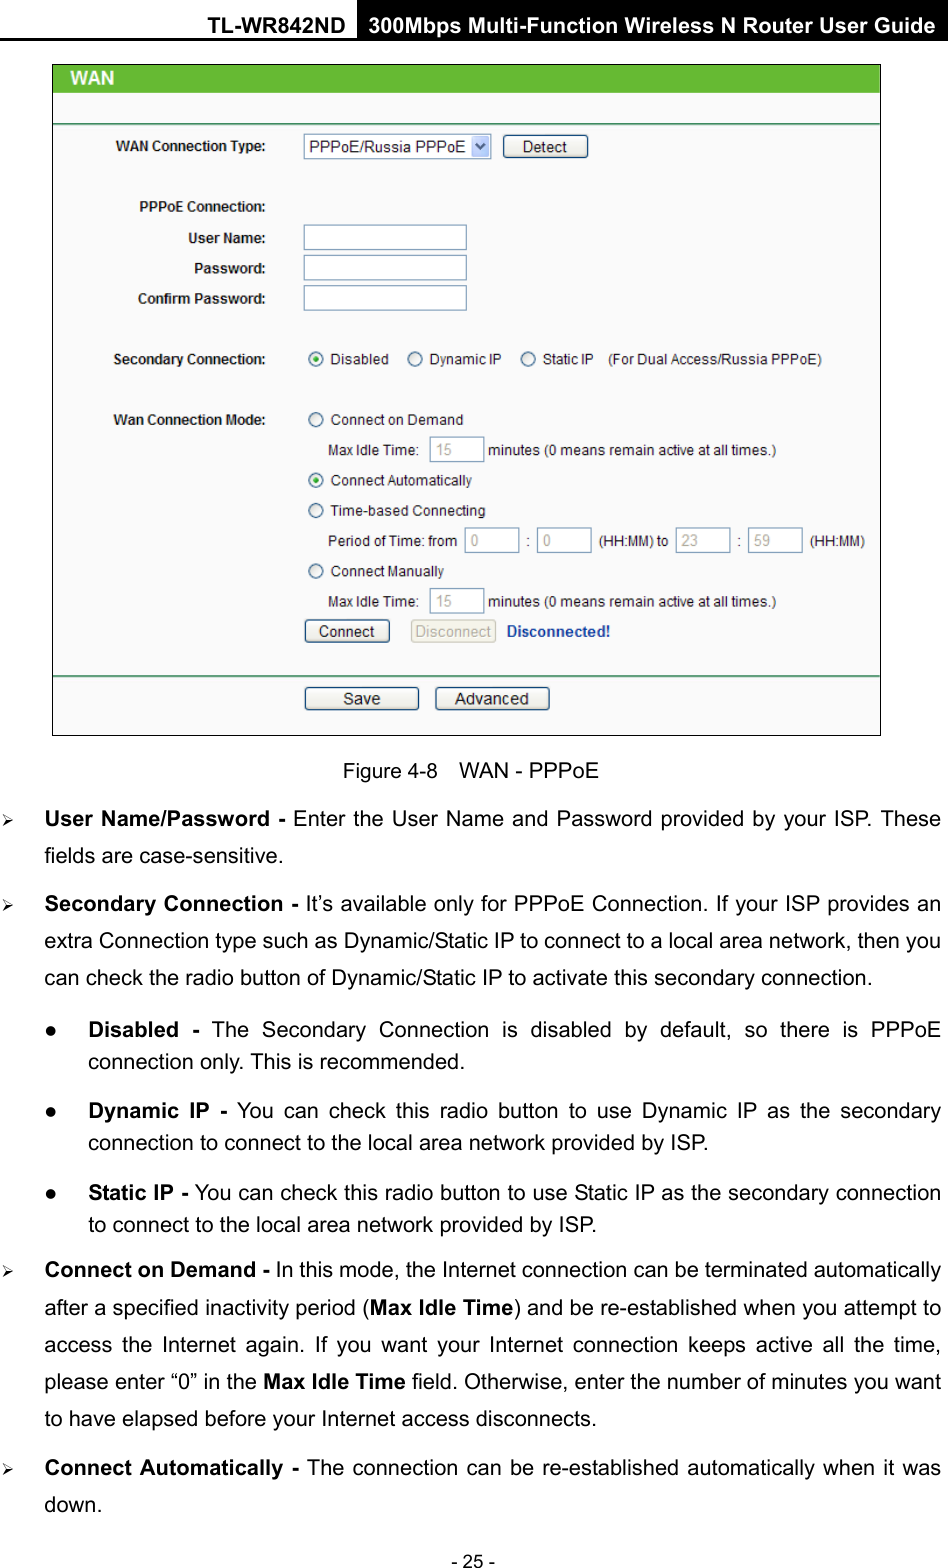 TL-WR842ND 300Mbps Multi-Function Wireless N Router User Guide  - 25 -  Figure 4-8   WAN - PPPoE  User Name/Password - Enter the User Name and Password provided by your ISP. These fields are case-sensitive.  Secondary Connection - It’s available only for PPPoE Connection. If your ISP provides an extra Connection type such as Dynamic/Static IP to connect to a local area network, then you can check the radio button of Dynamic/Static IP to activate this secondary connection.  Disabled - The Secondary Connection is disabled by default,  so there is PPPoE connection only. This is recommended.  Dynamic IP -  You can check this radio button to use Dynamic IP as the secondary connection to connect to the local area network provided by ISP.  Static IP - You can check this radio button to use Static IP as the secondary connection to connect to the local area network provided by ISP.  Connect on Demand - In this mode, the Internet connection can be terminated automatically after a specified inactivity period (Max Idle Time) and be re-established when you attempt to access the Internet again. If you want your Internet connection keeps active all the  time, please enter “0” in the Max Idle Time field. Otherwise, enter the number of minutes you want to have elapsed before your Internet access disconnects.  Connect Automatically - The connection can be re-established automatically when it was down. 